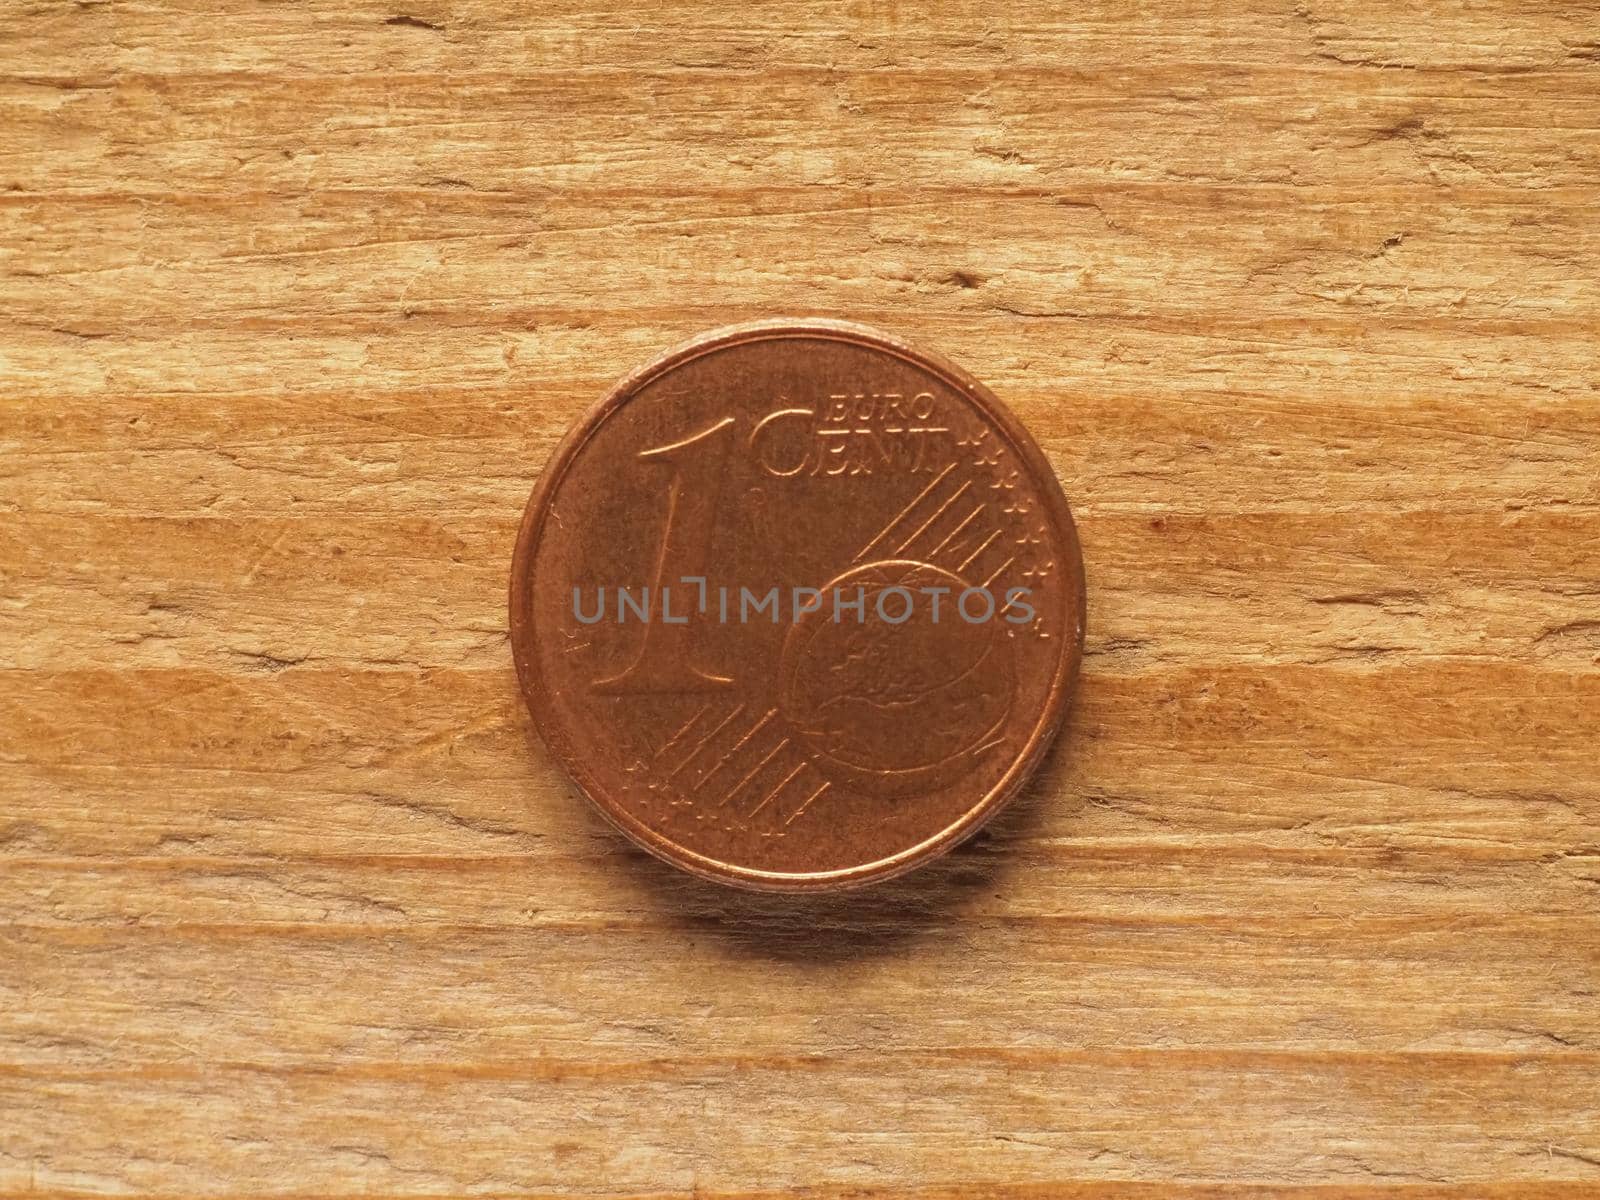 1 cent coin common side, currency of Europe by claudiodivizia